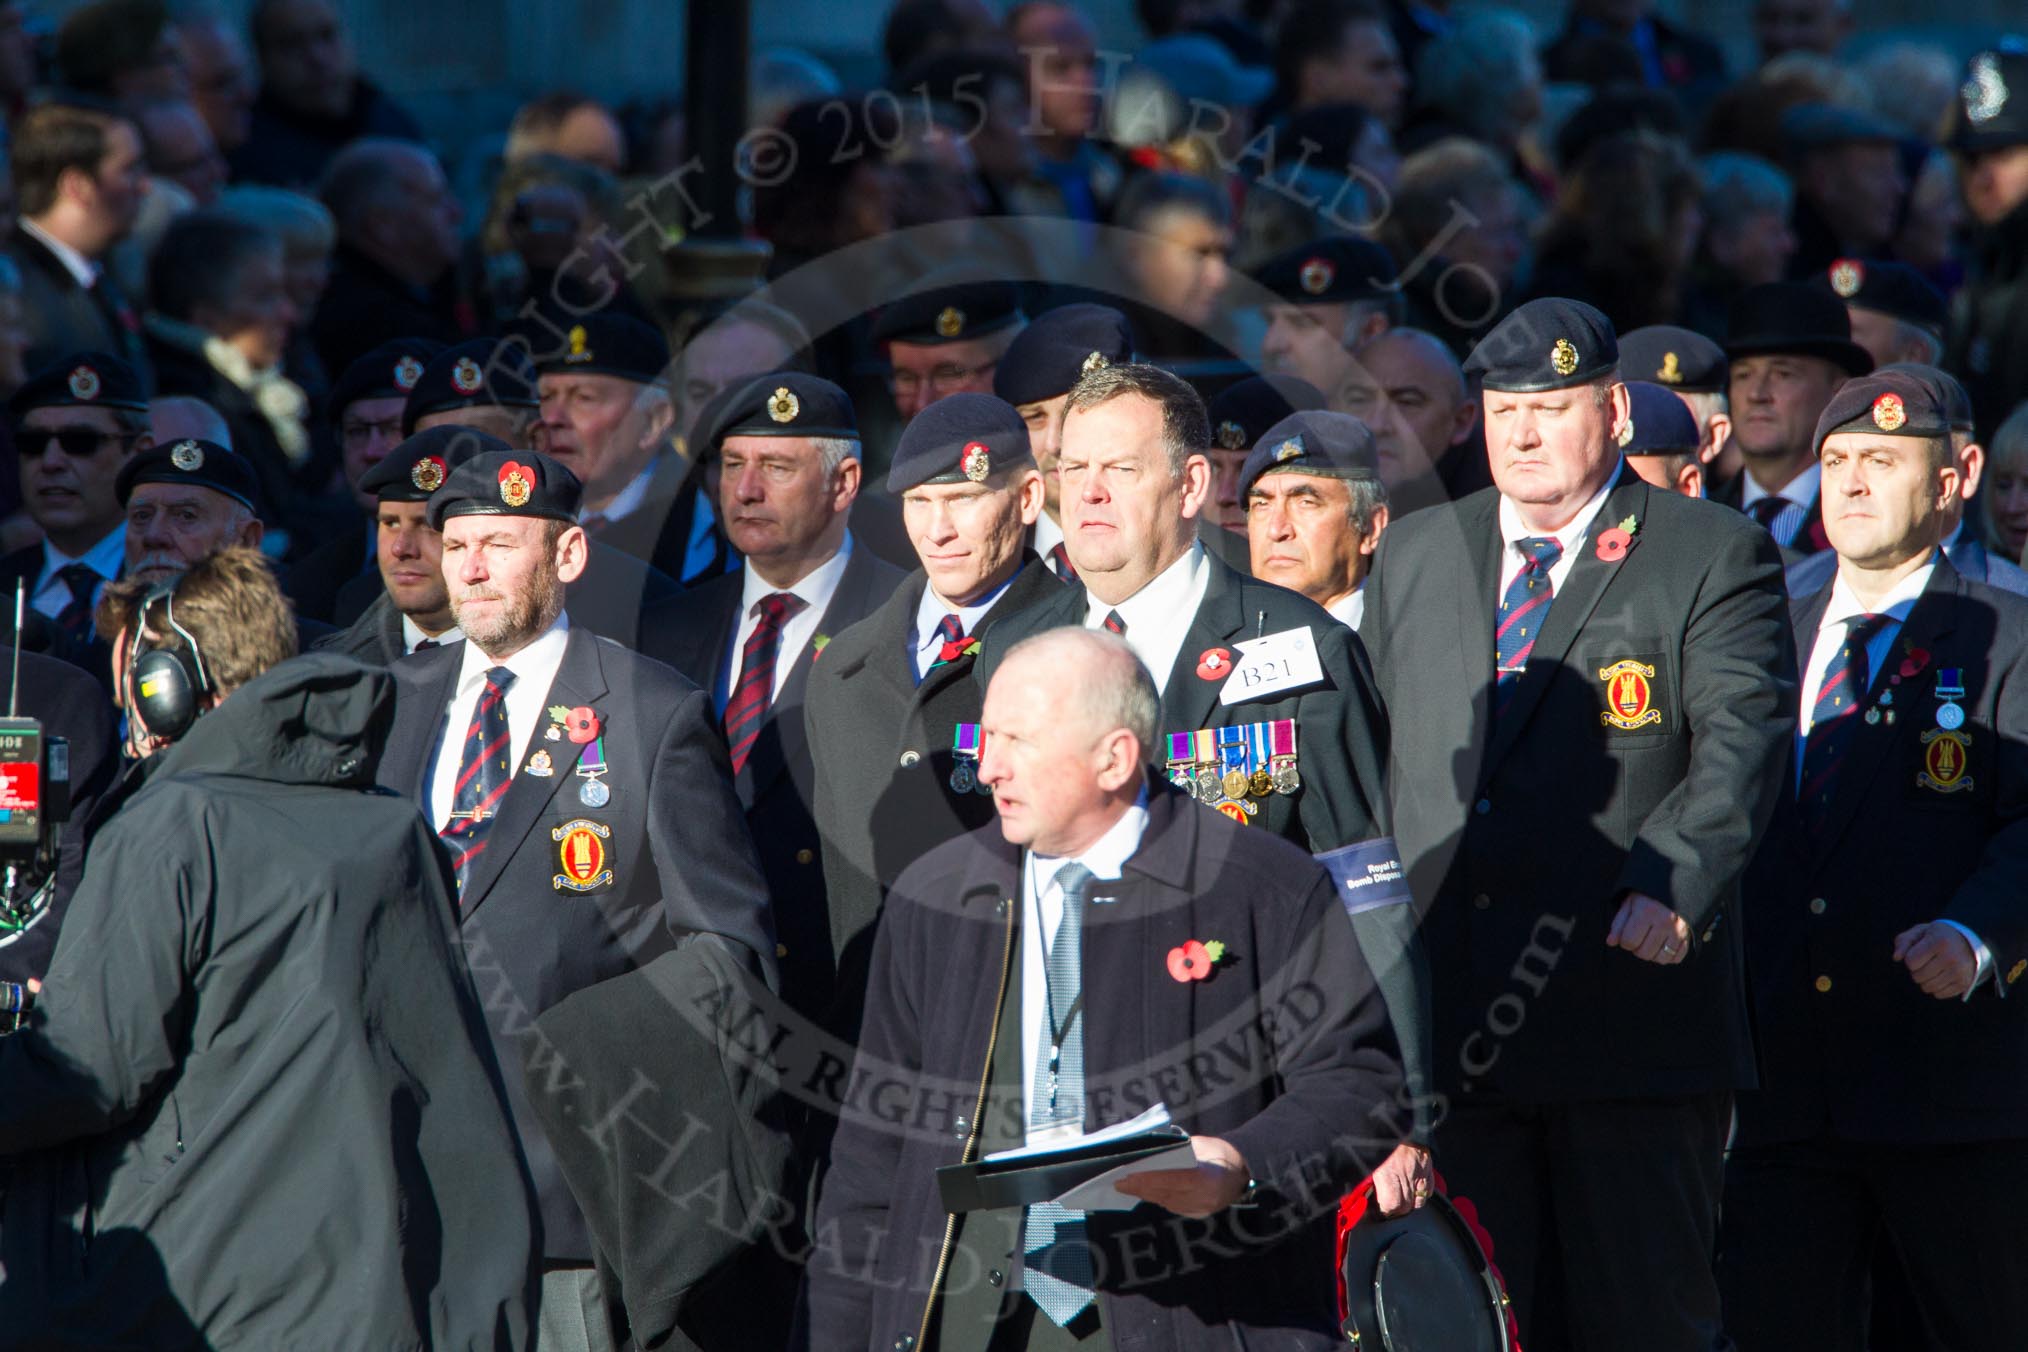 Remembrance Sunday Cenotaph March Past 2013: B21 - Royal Engineers Bomb Disposal Association..
Press stand opposite the Foreign Office building, Whitehall, London SW1,
London,
Greater London,
United Kingdom,
on 10 November 2013 at 12:02, image #1472